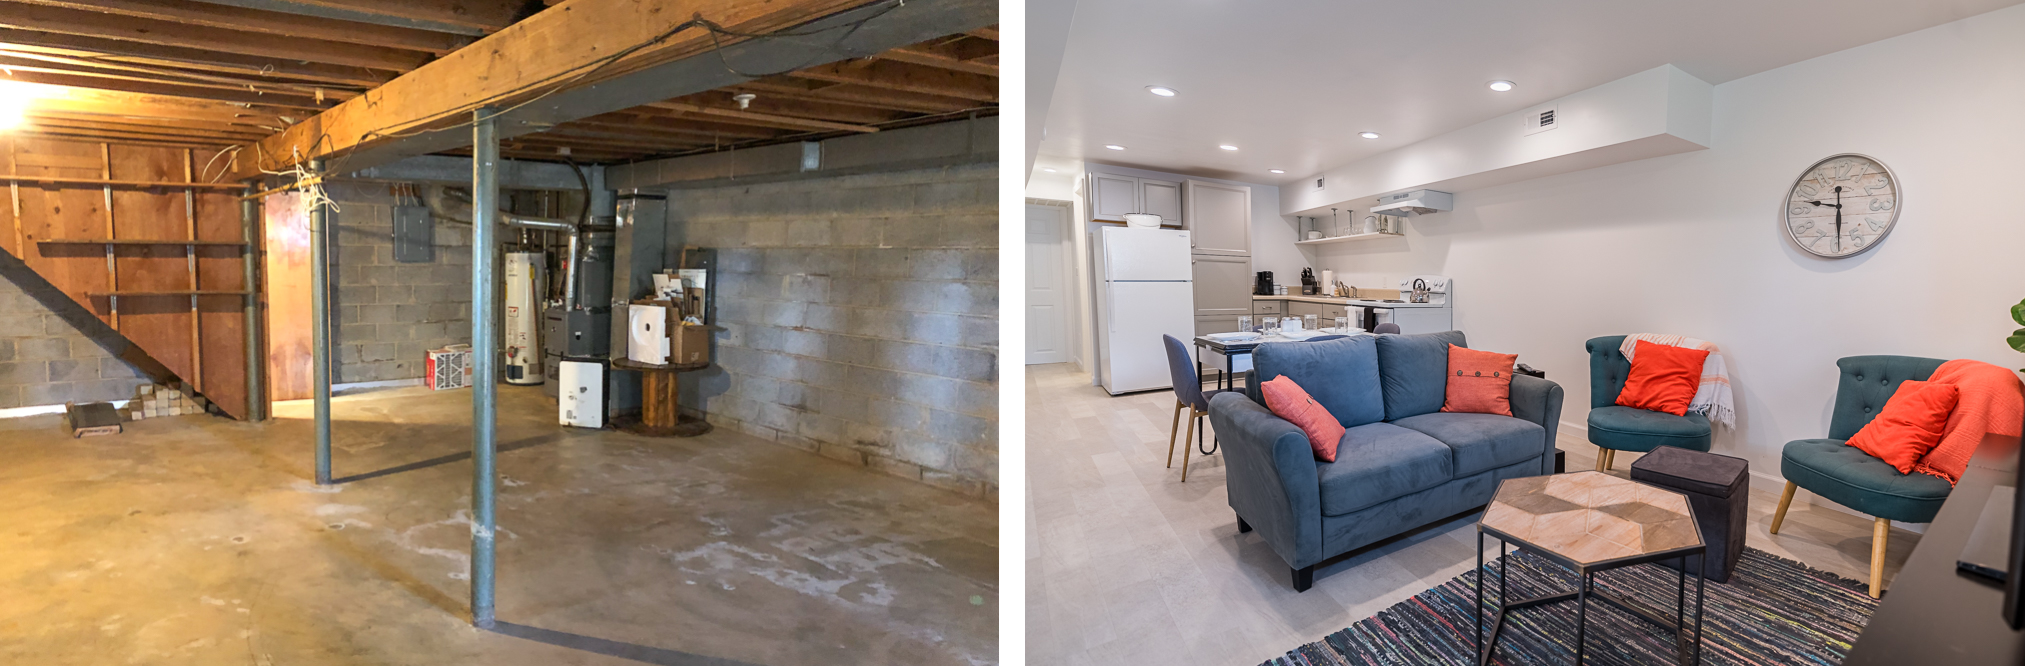 How We Renovated Our Basement into an AirBnB Apartment - Hunter and Sarah Photography